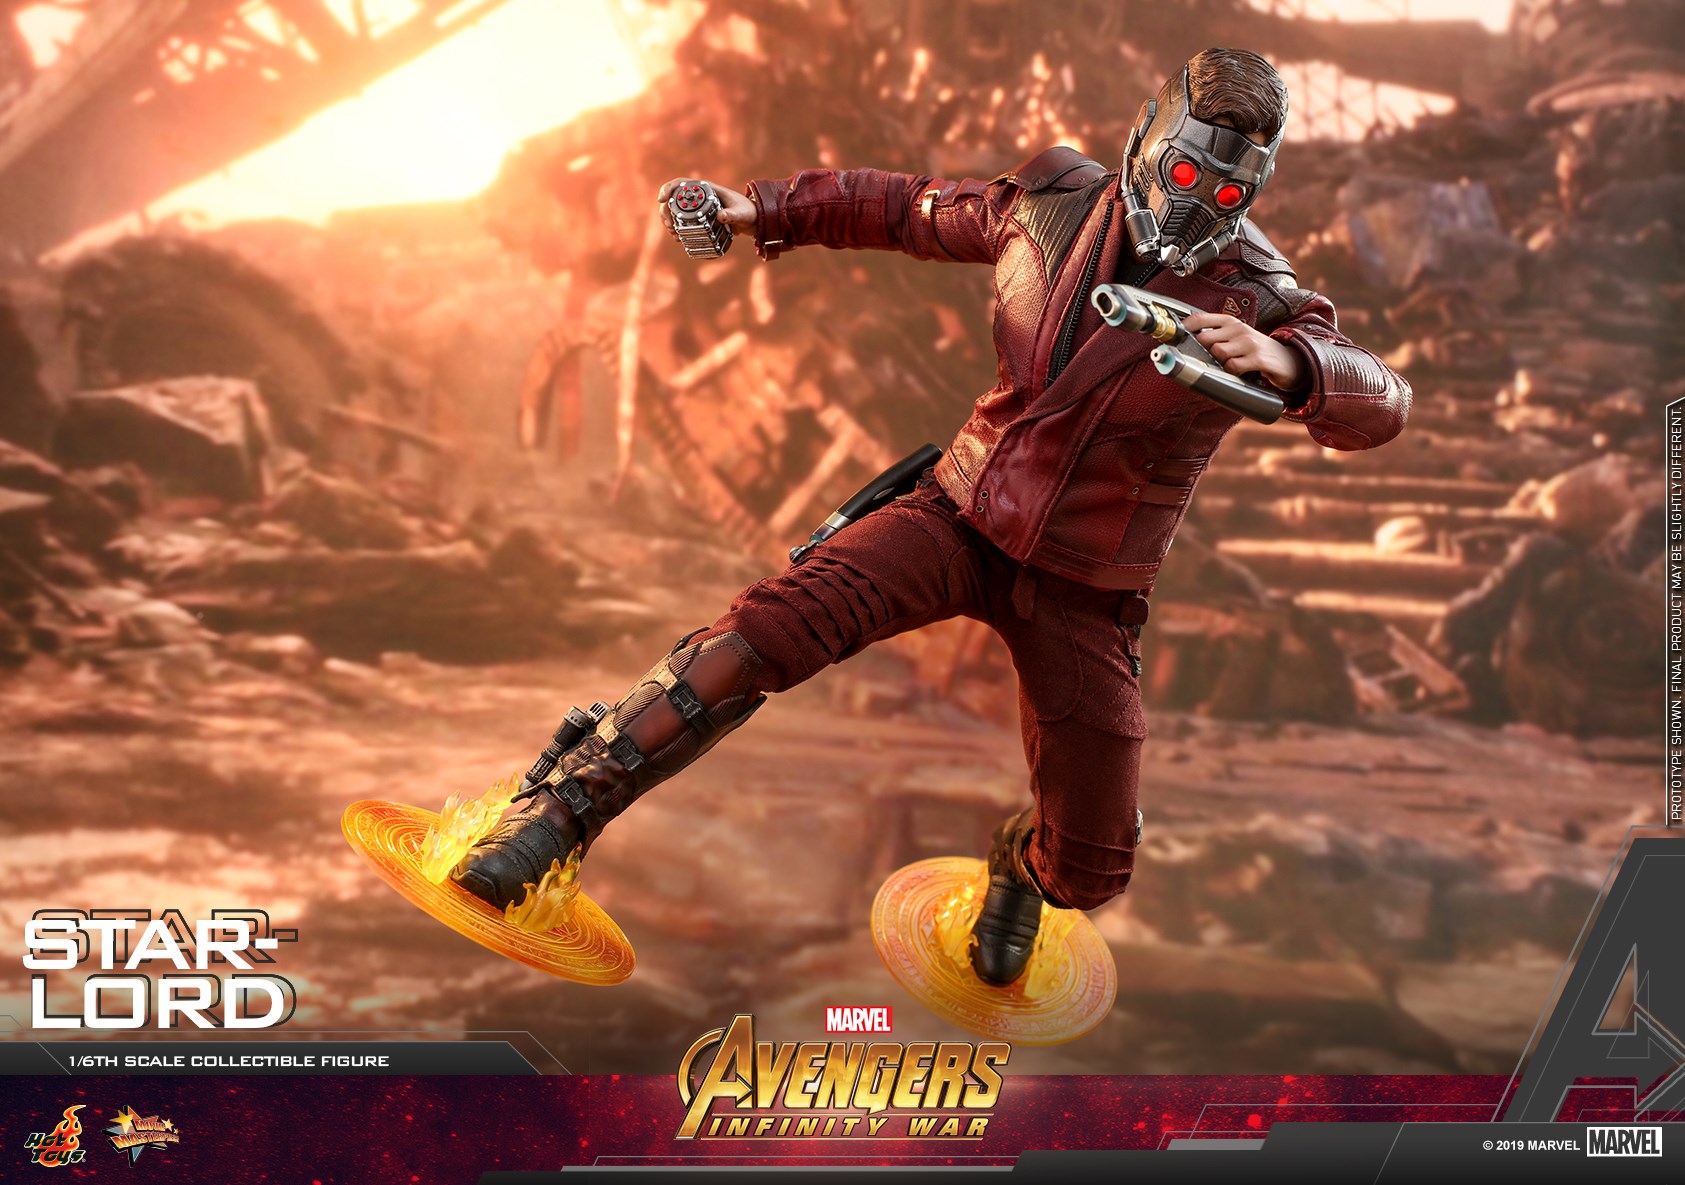 Hot Toys - MMS539 - Avengers: Infinity War - Star-Lord (Peter Quill) - Marvelous Toys